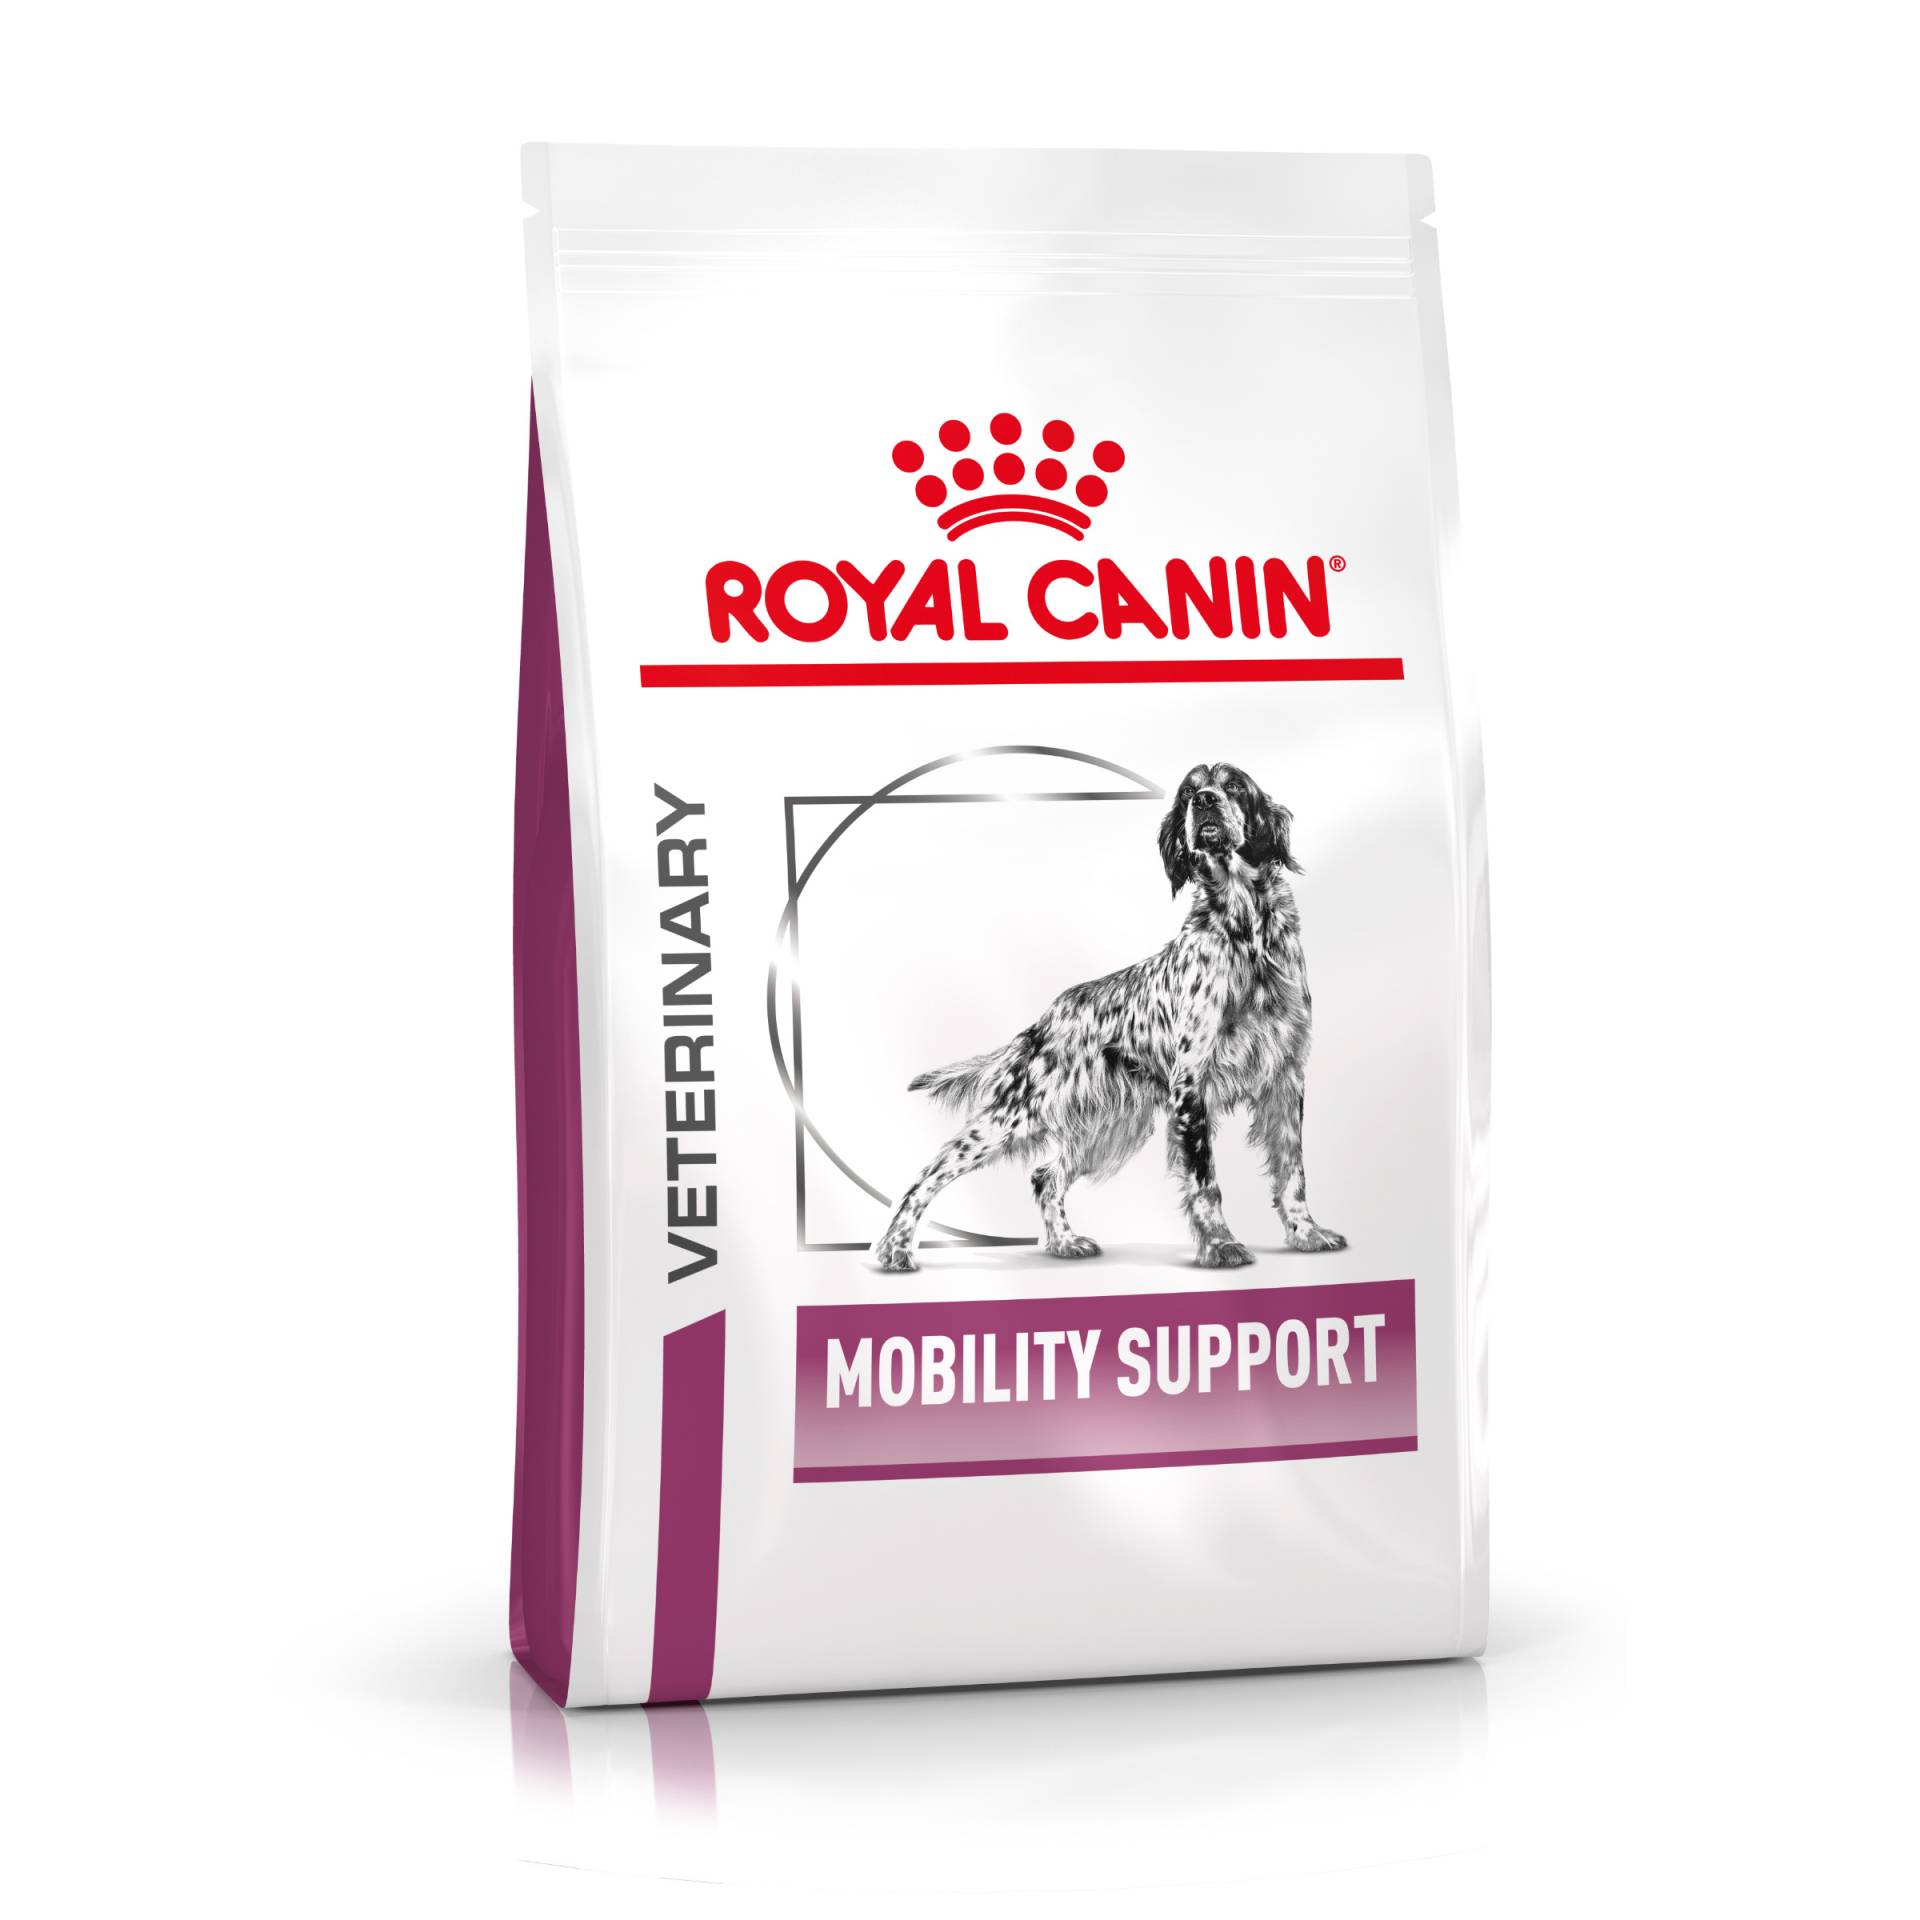 Royal Canin Veterinary Canine Mobility Support - 12 kg von Royal Canin Veterinary Diet